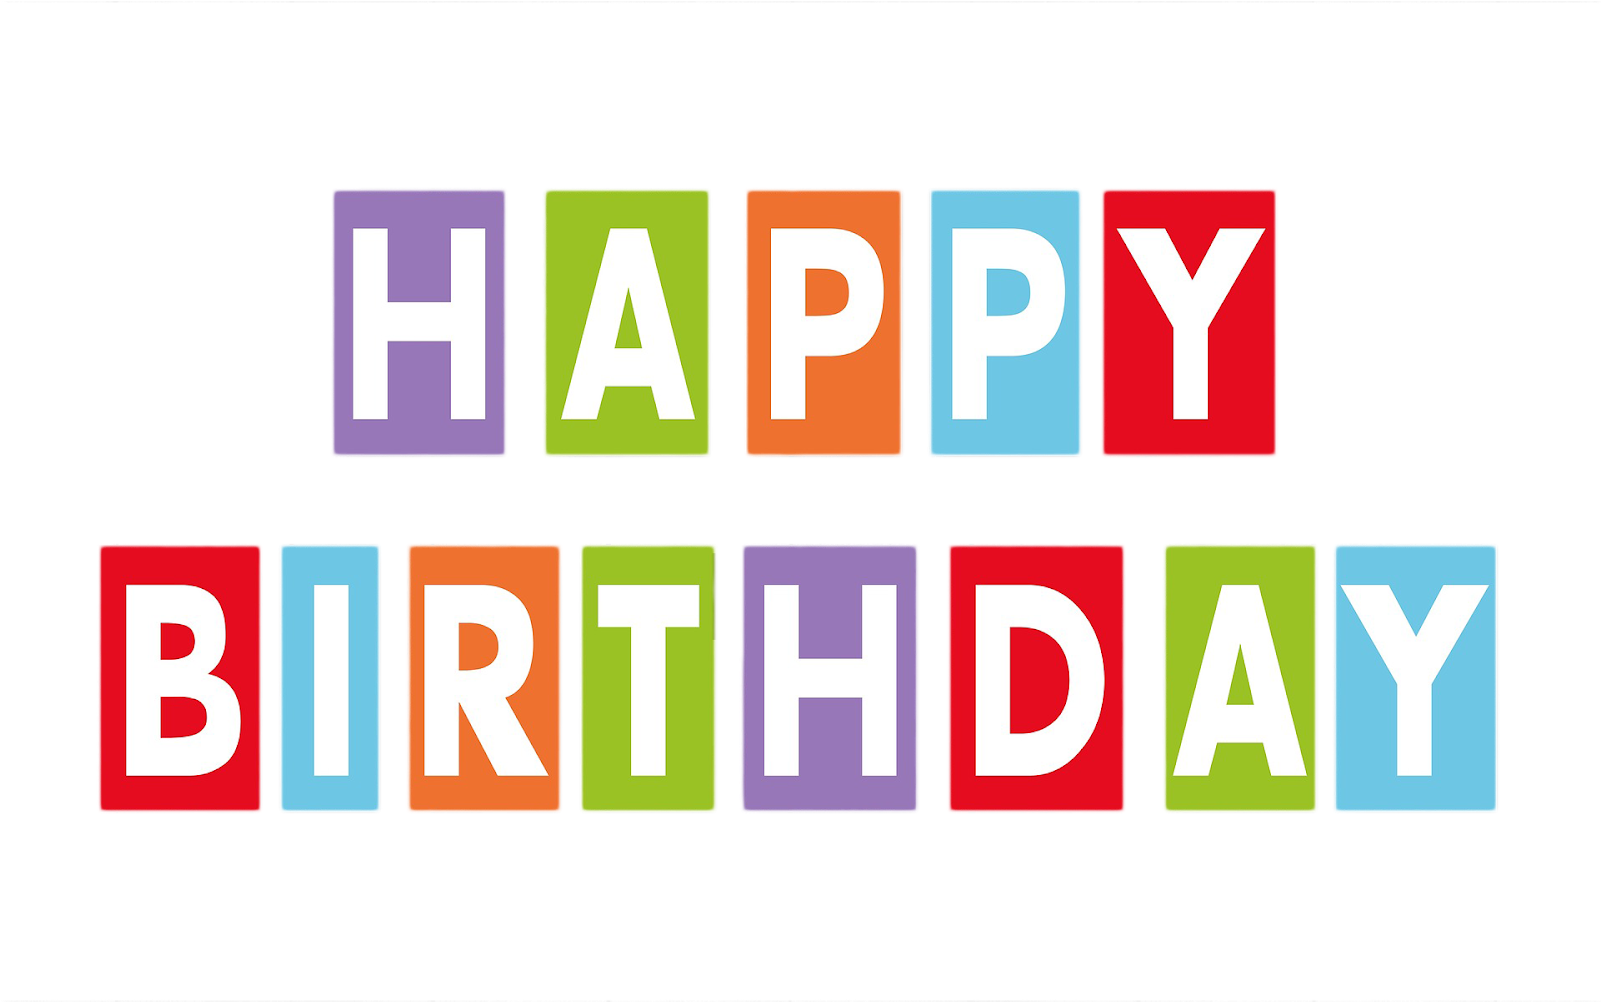 Happy Birthday Text Colorful Image Portable Network - Happy Birthday Text Colorful Image Portable Network (1601x1002)